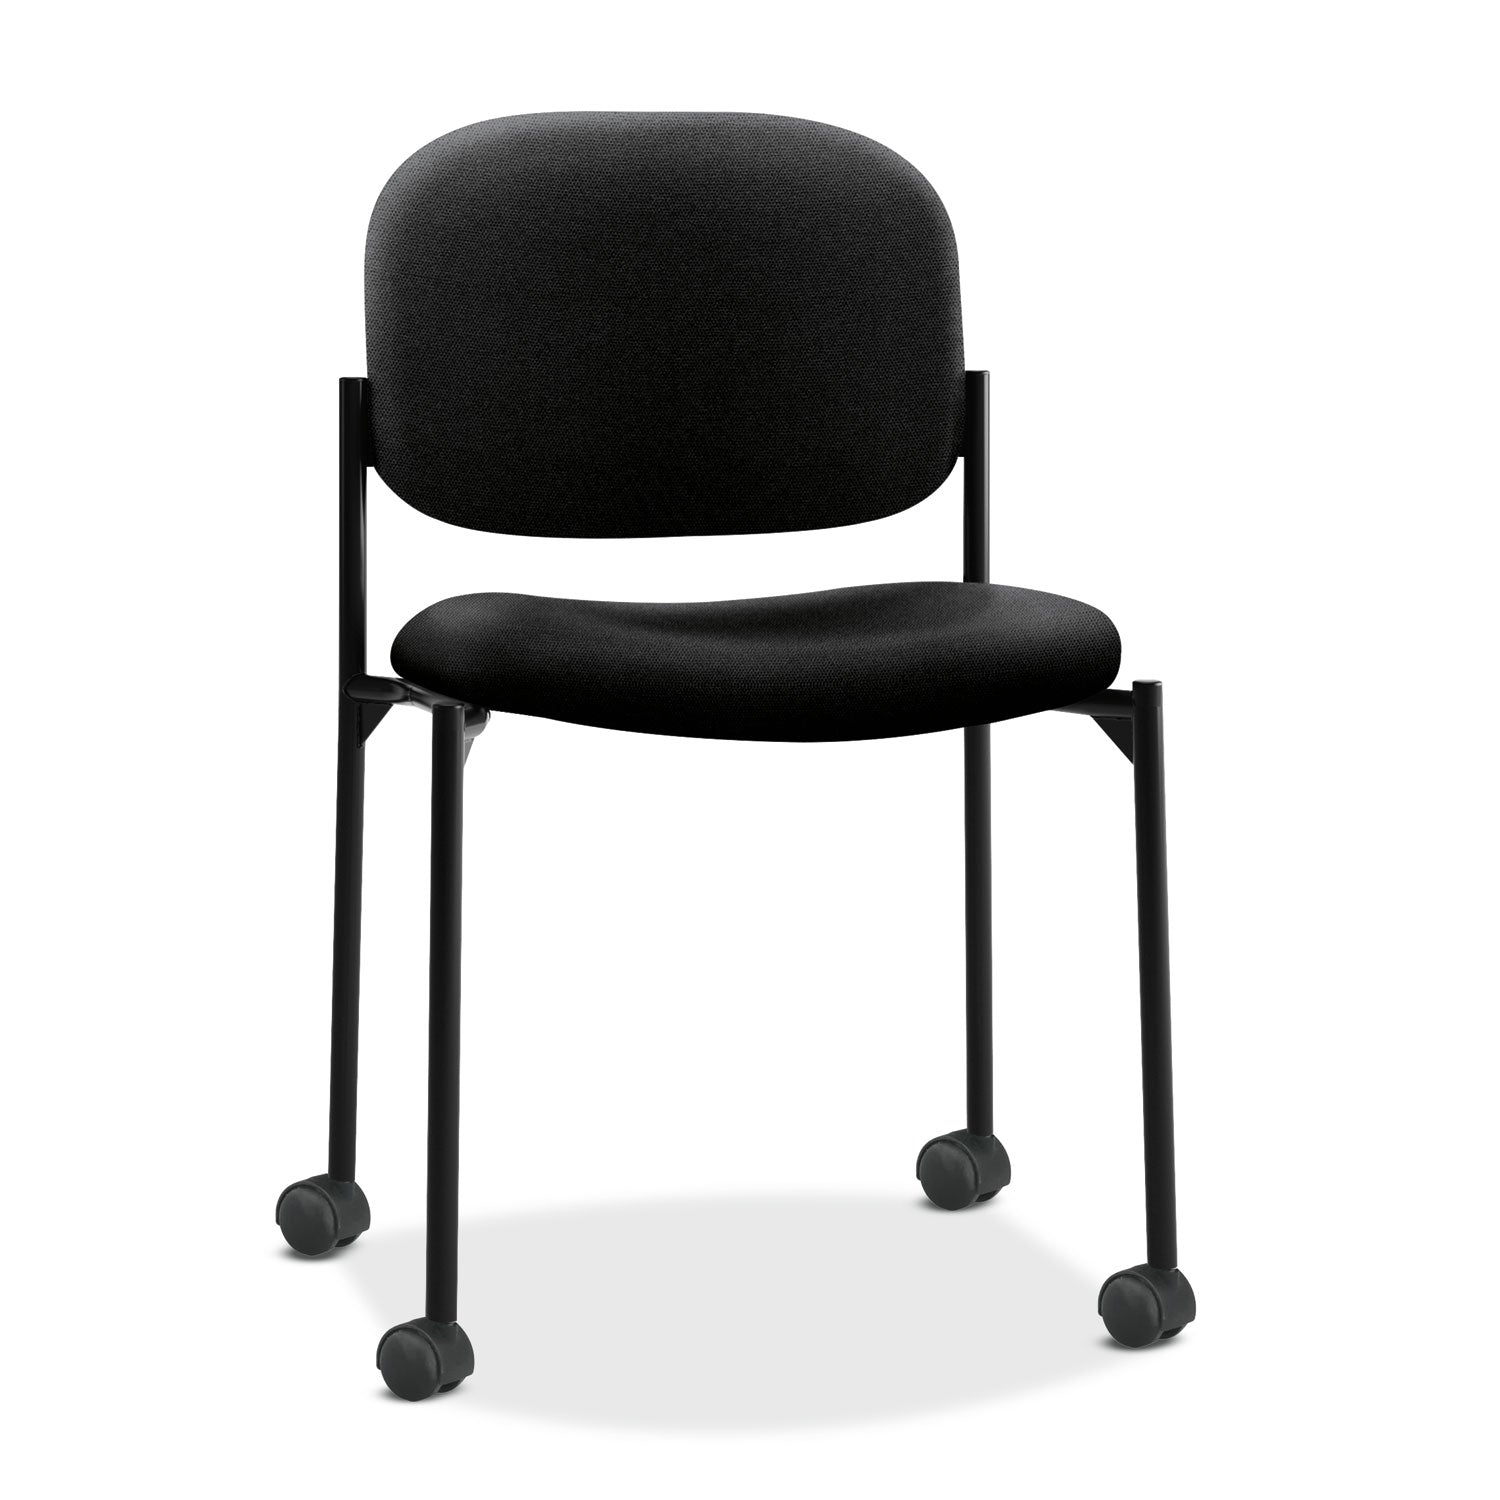 VL606 Stacking Guest Chair without Arms, Fabric Upholstery, 21.25" x 21" x 32.75", Black Seat, Black Back, Black Base - 